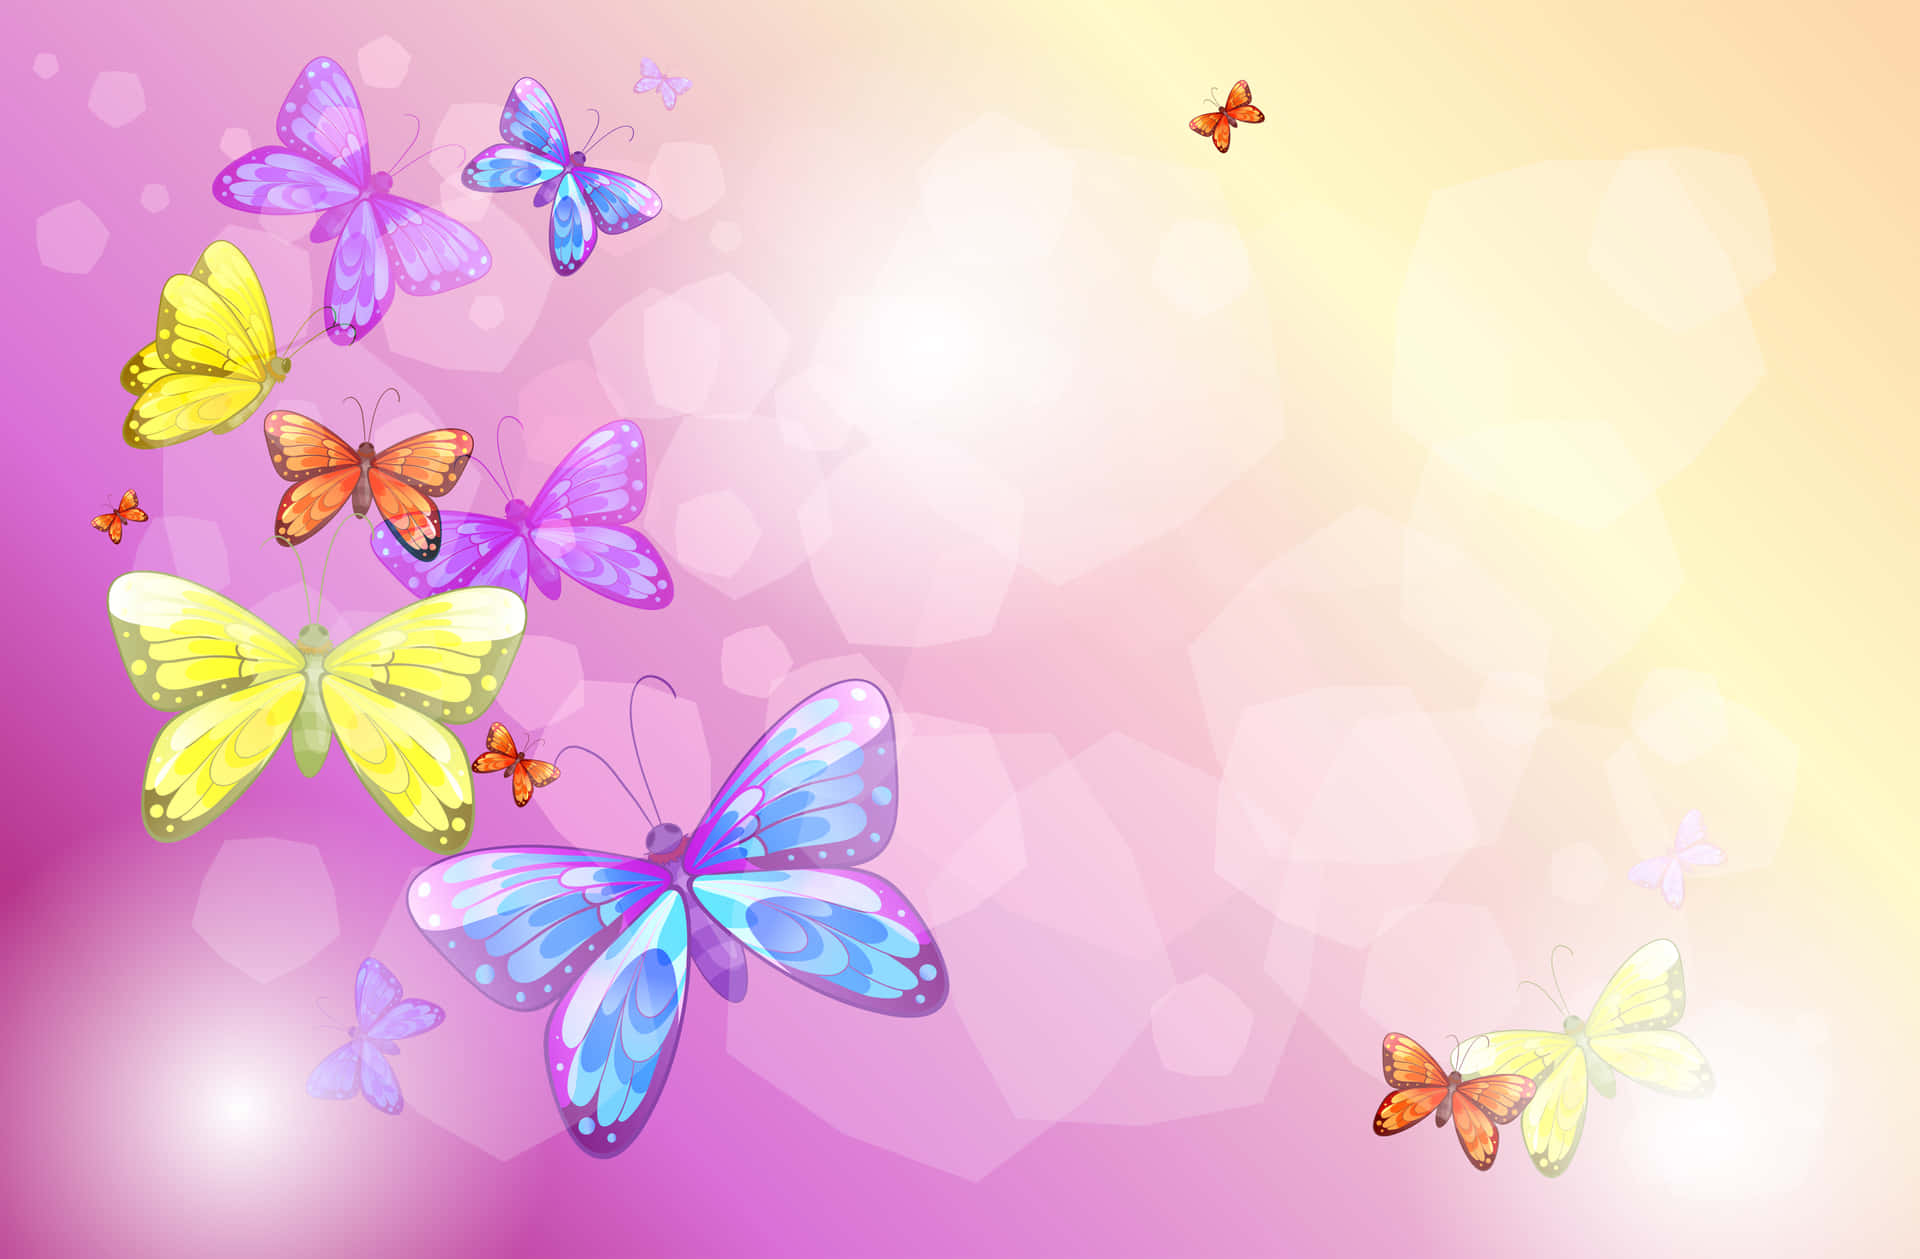 Connecting with Nature - Graceful Butterfly Art Wallpaper